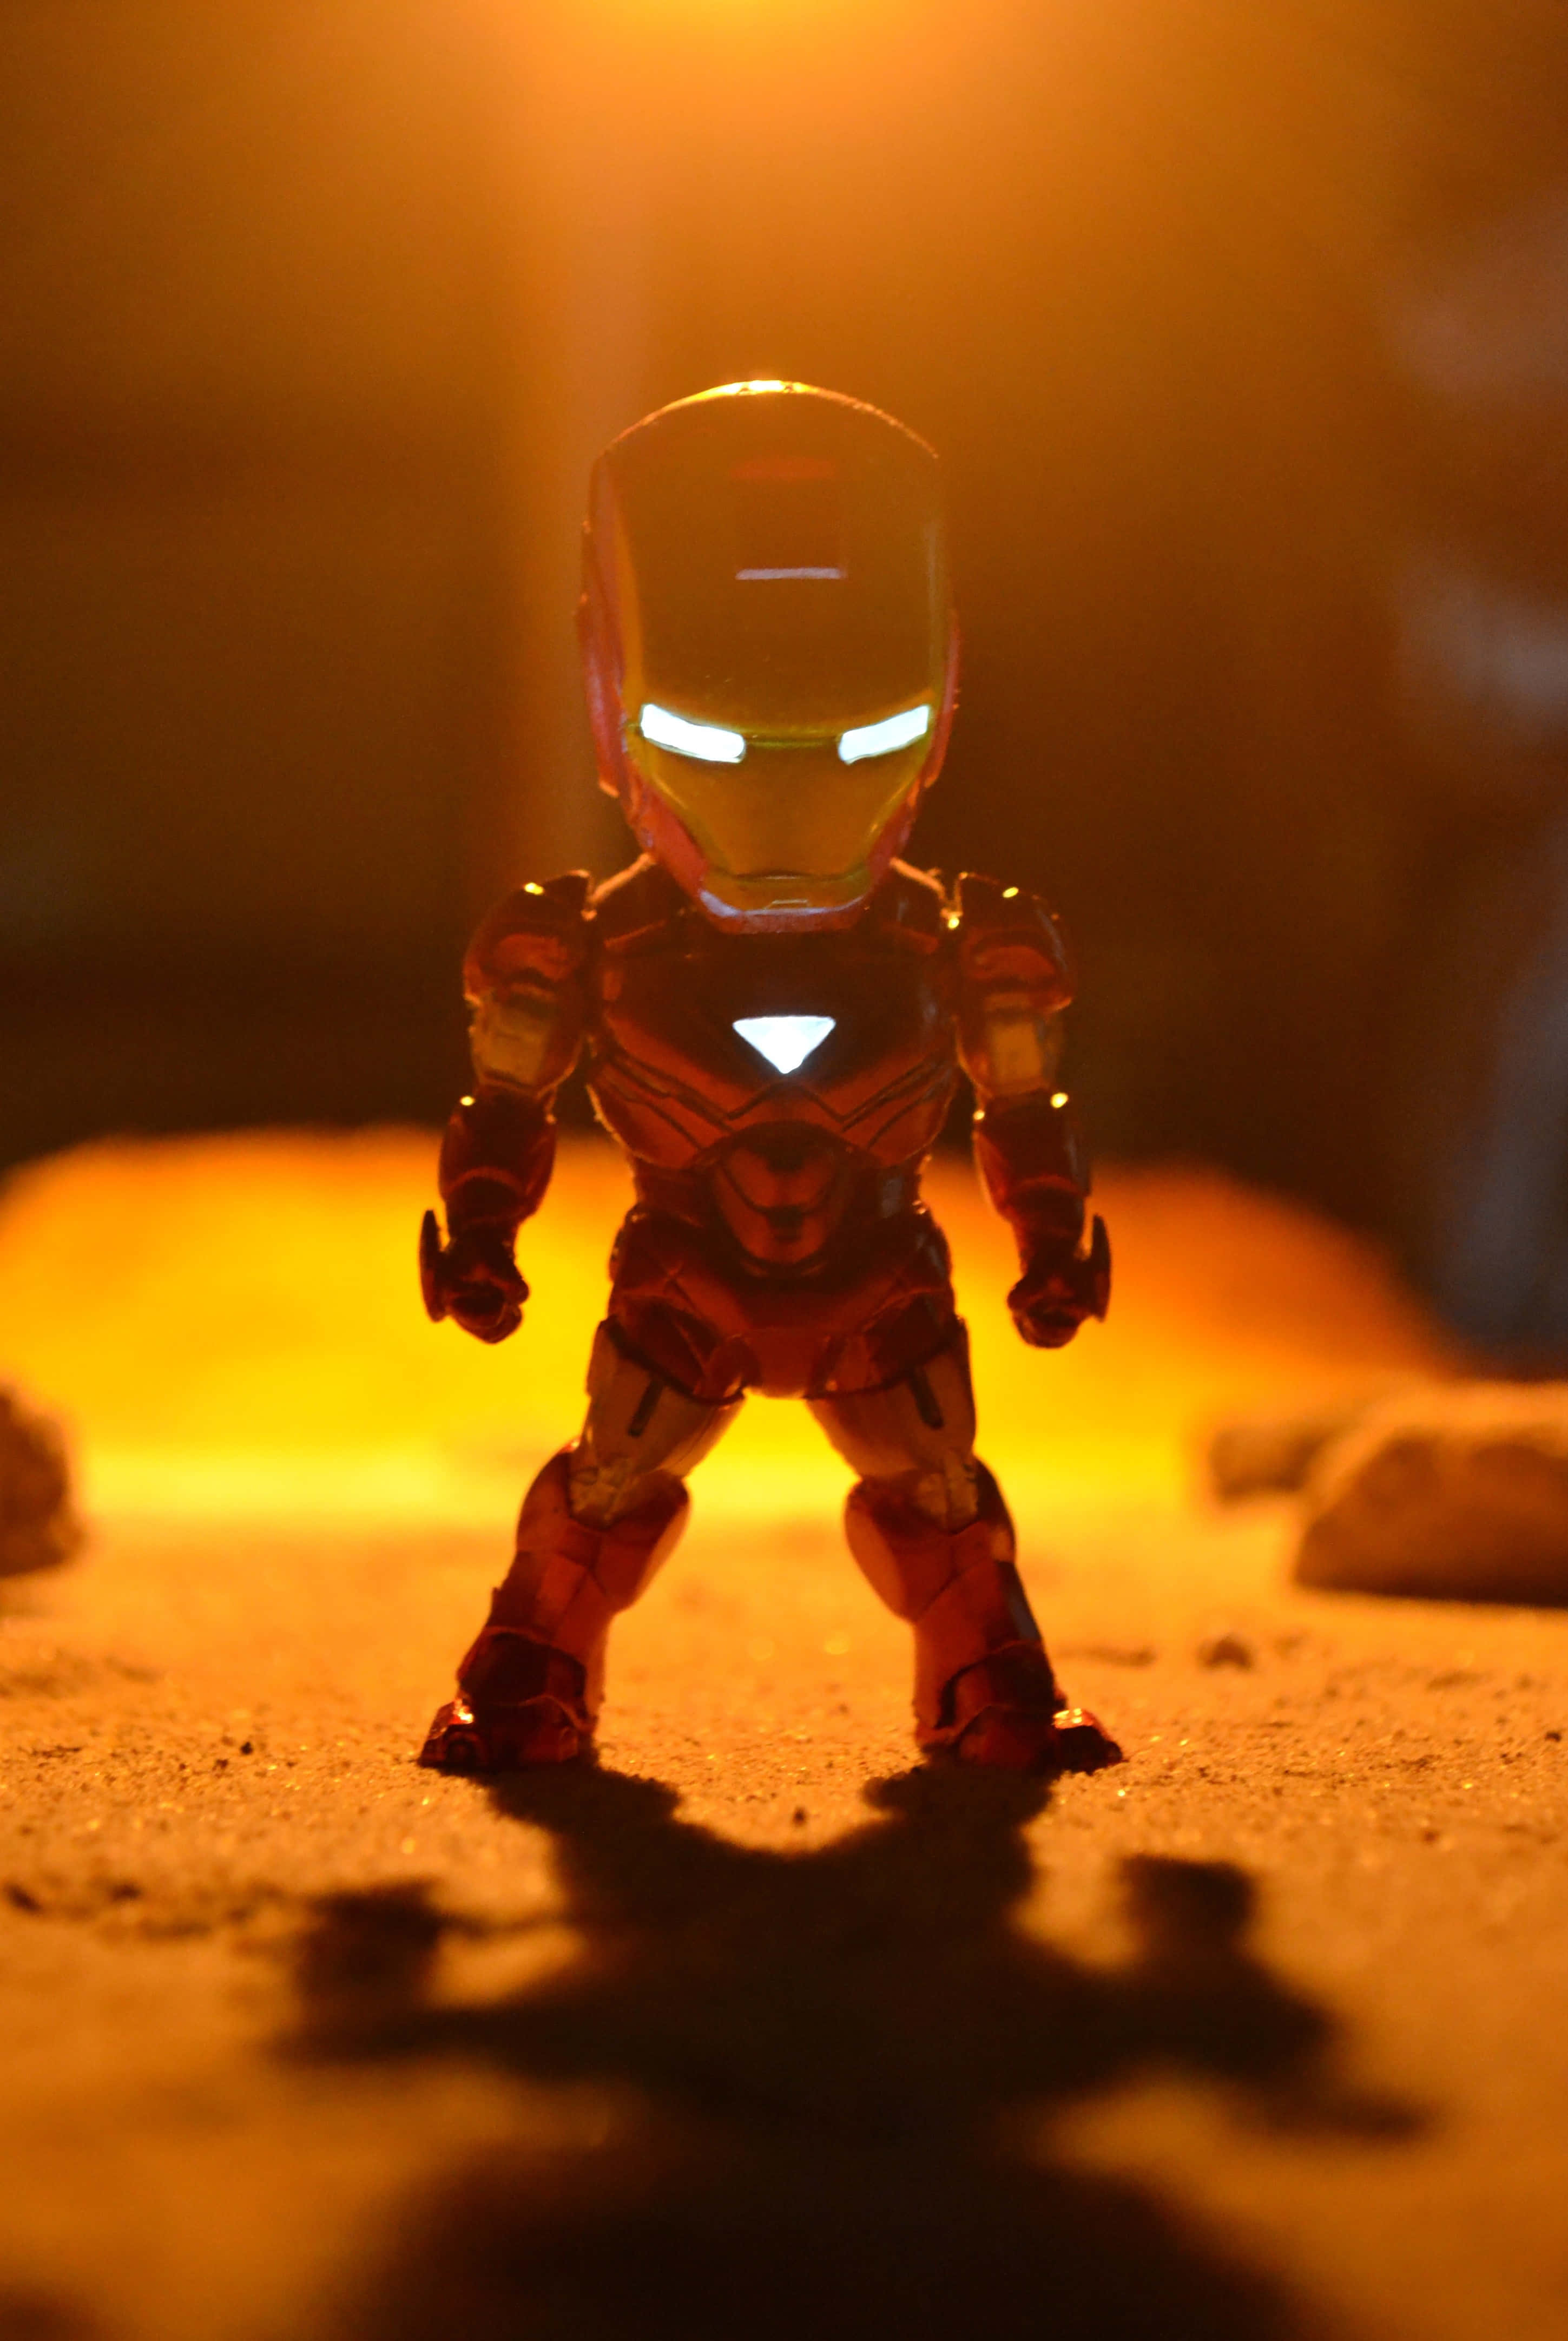 Marvel fans everywhere, enjoy all your favorite action figures of Iron Man Wallpaper